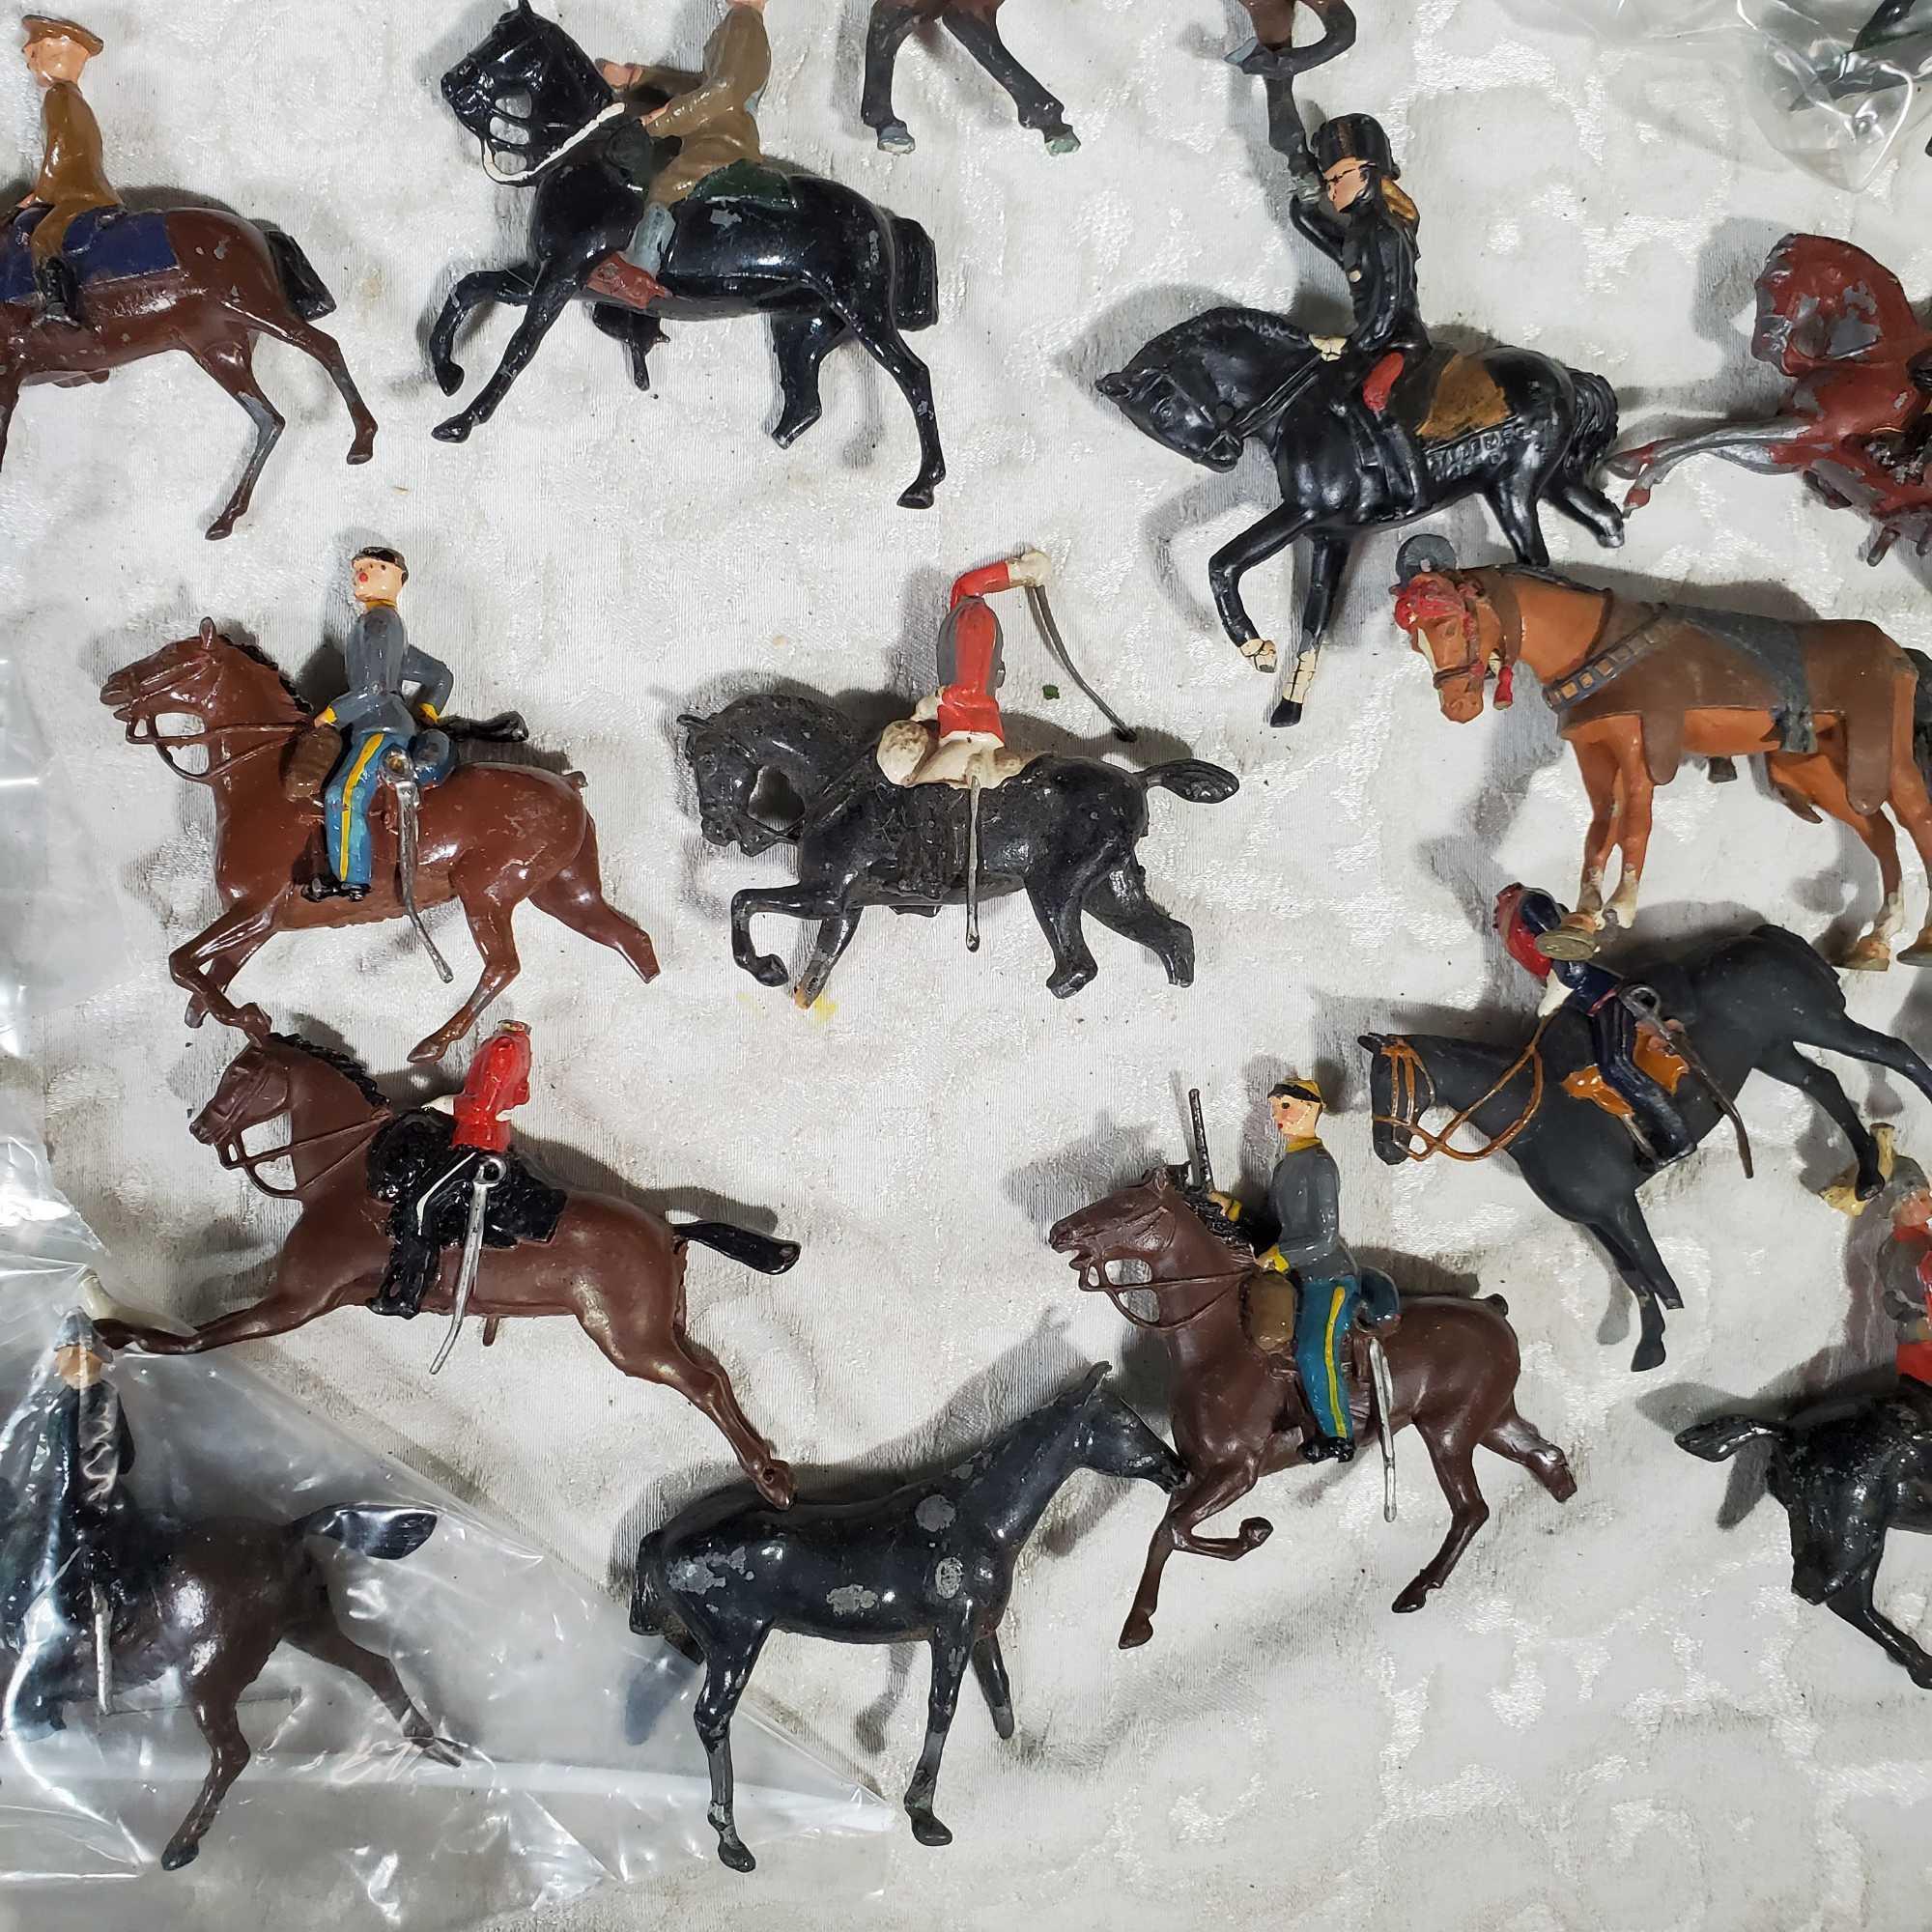 Tray Lot FULL of Fixer Upper Toy Soldiers Including Loads of Mounted, Most Are Britains, Johillco,